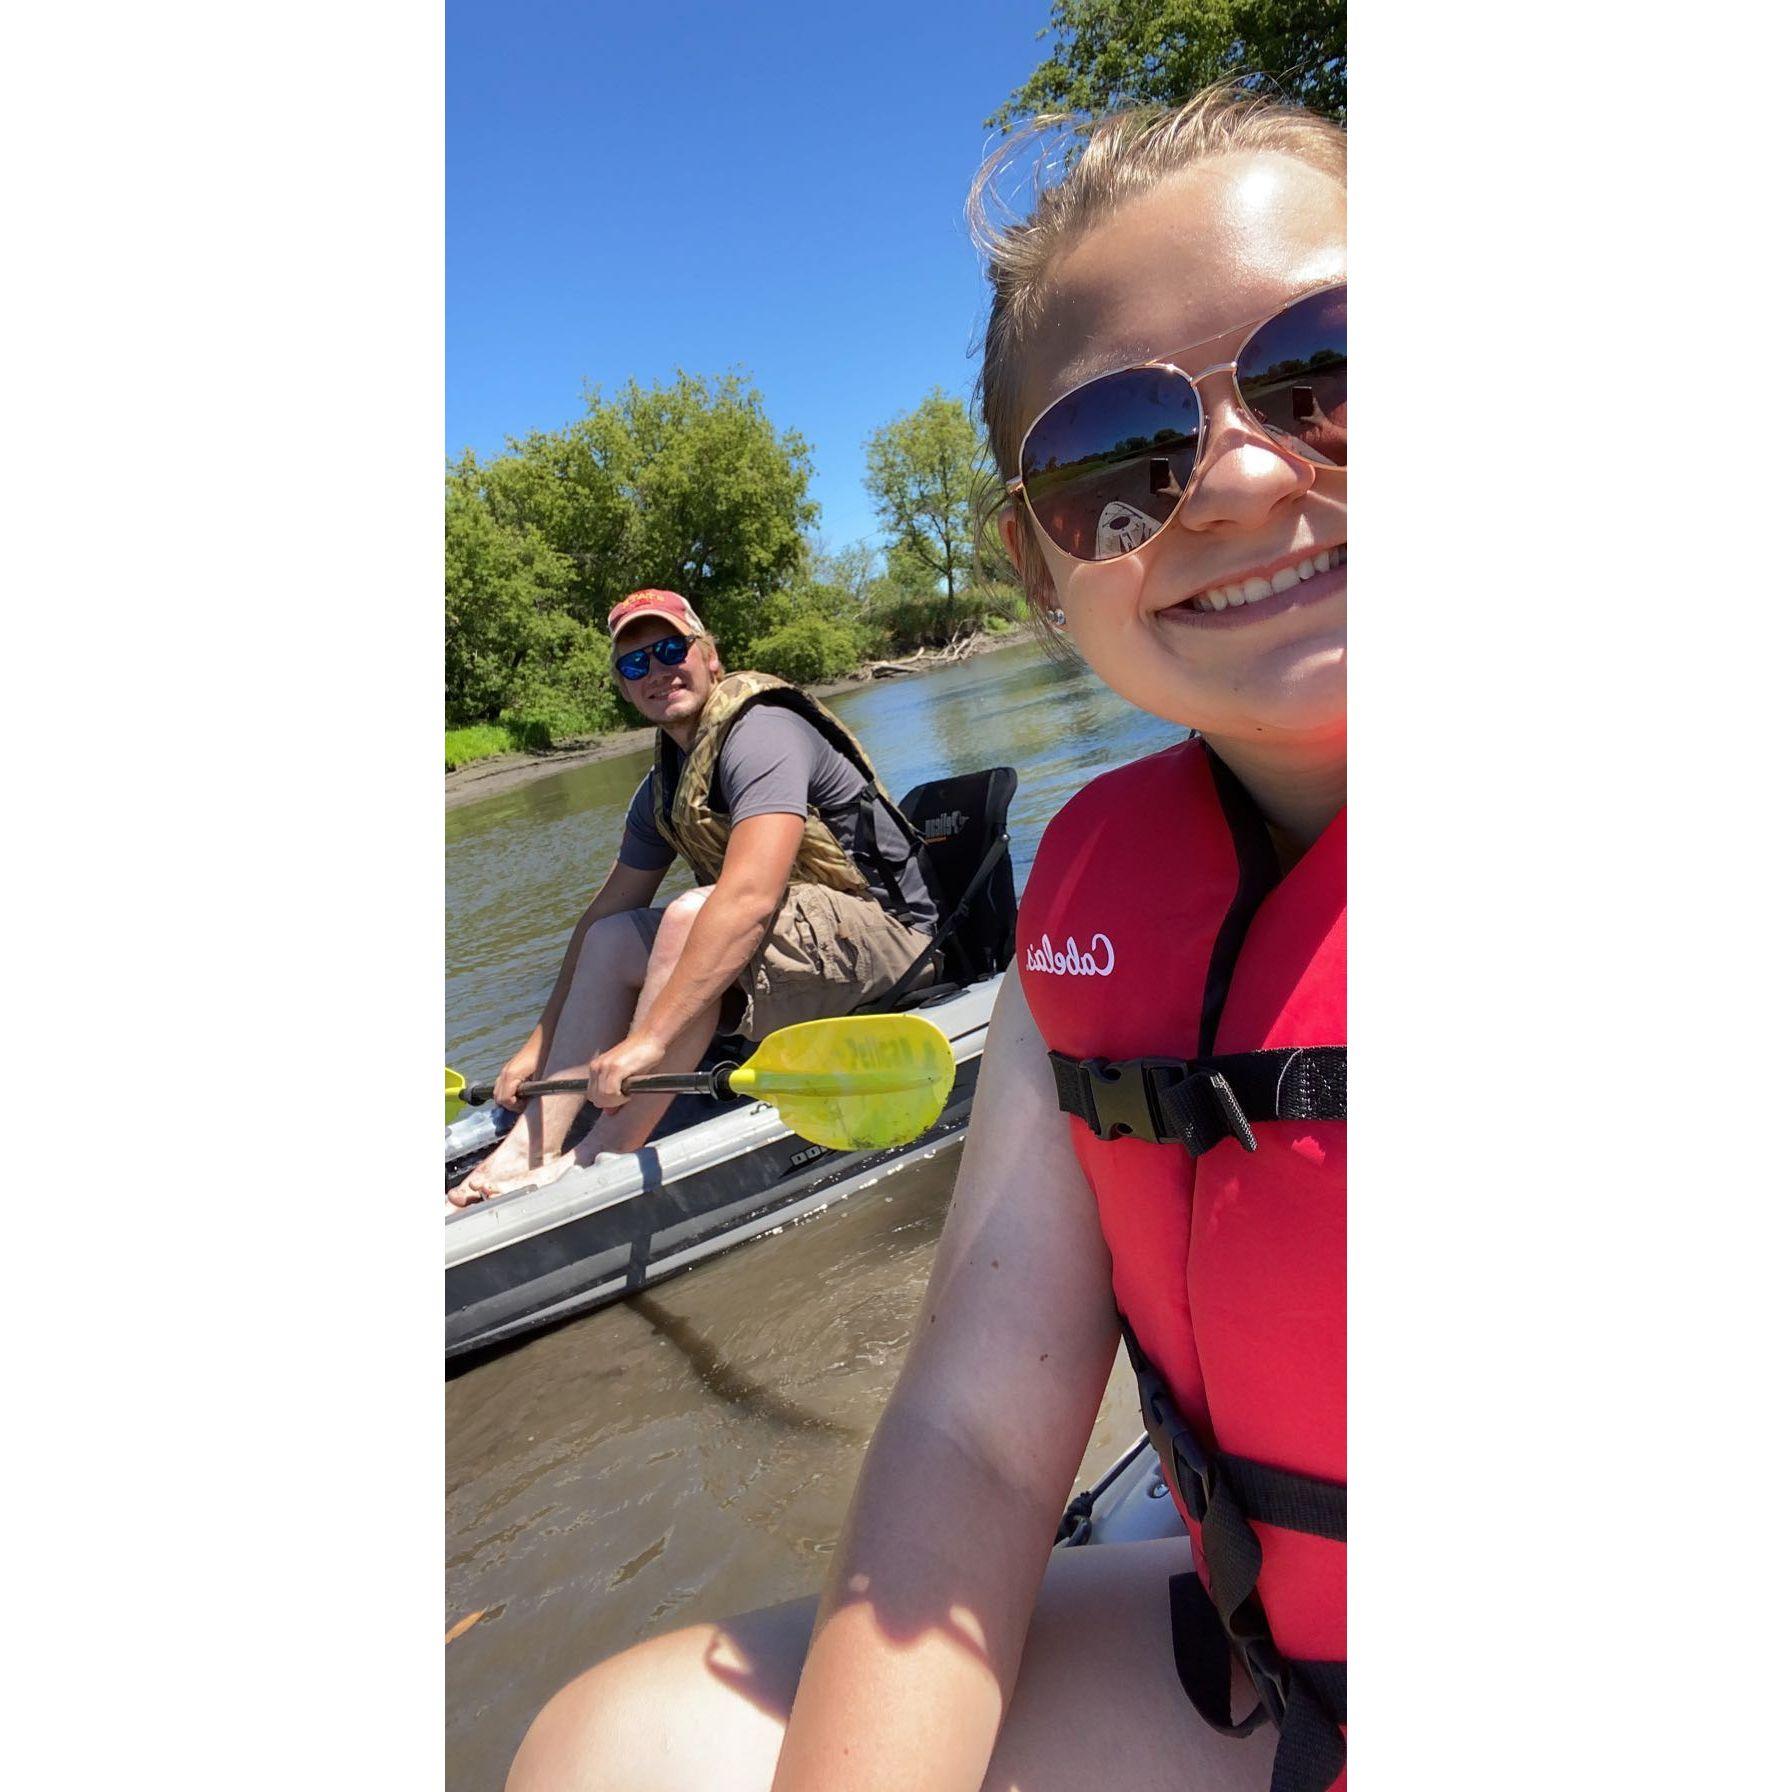 Kayaking down the Little Sioux!